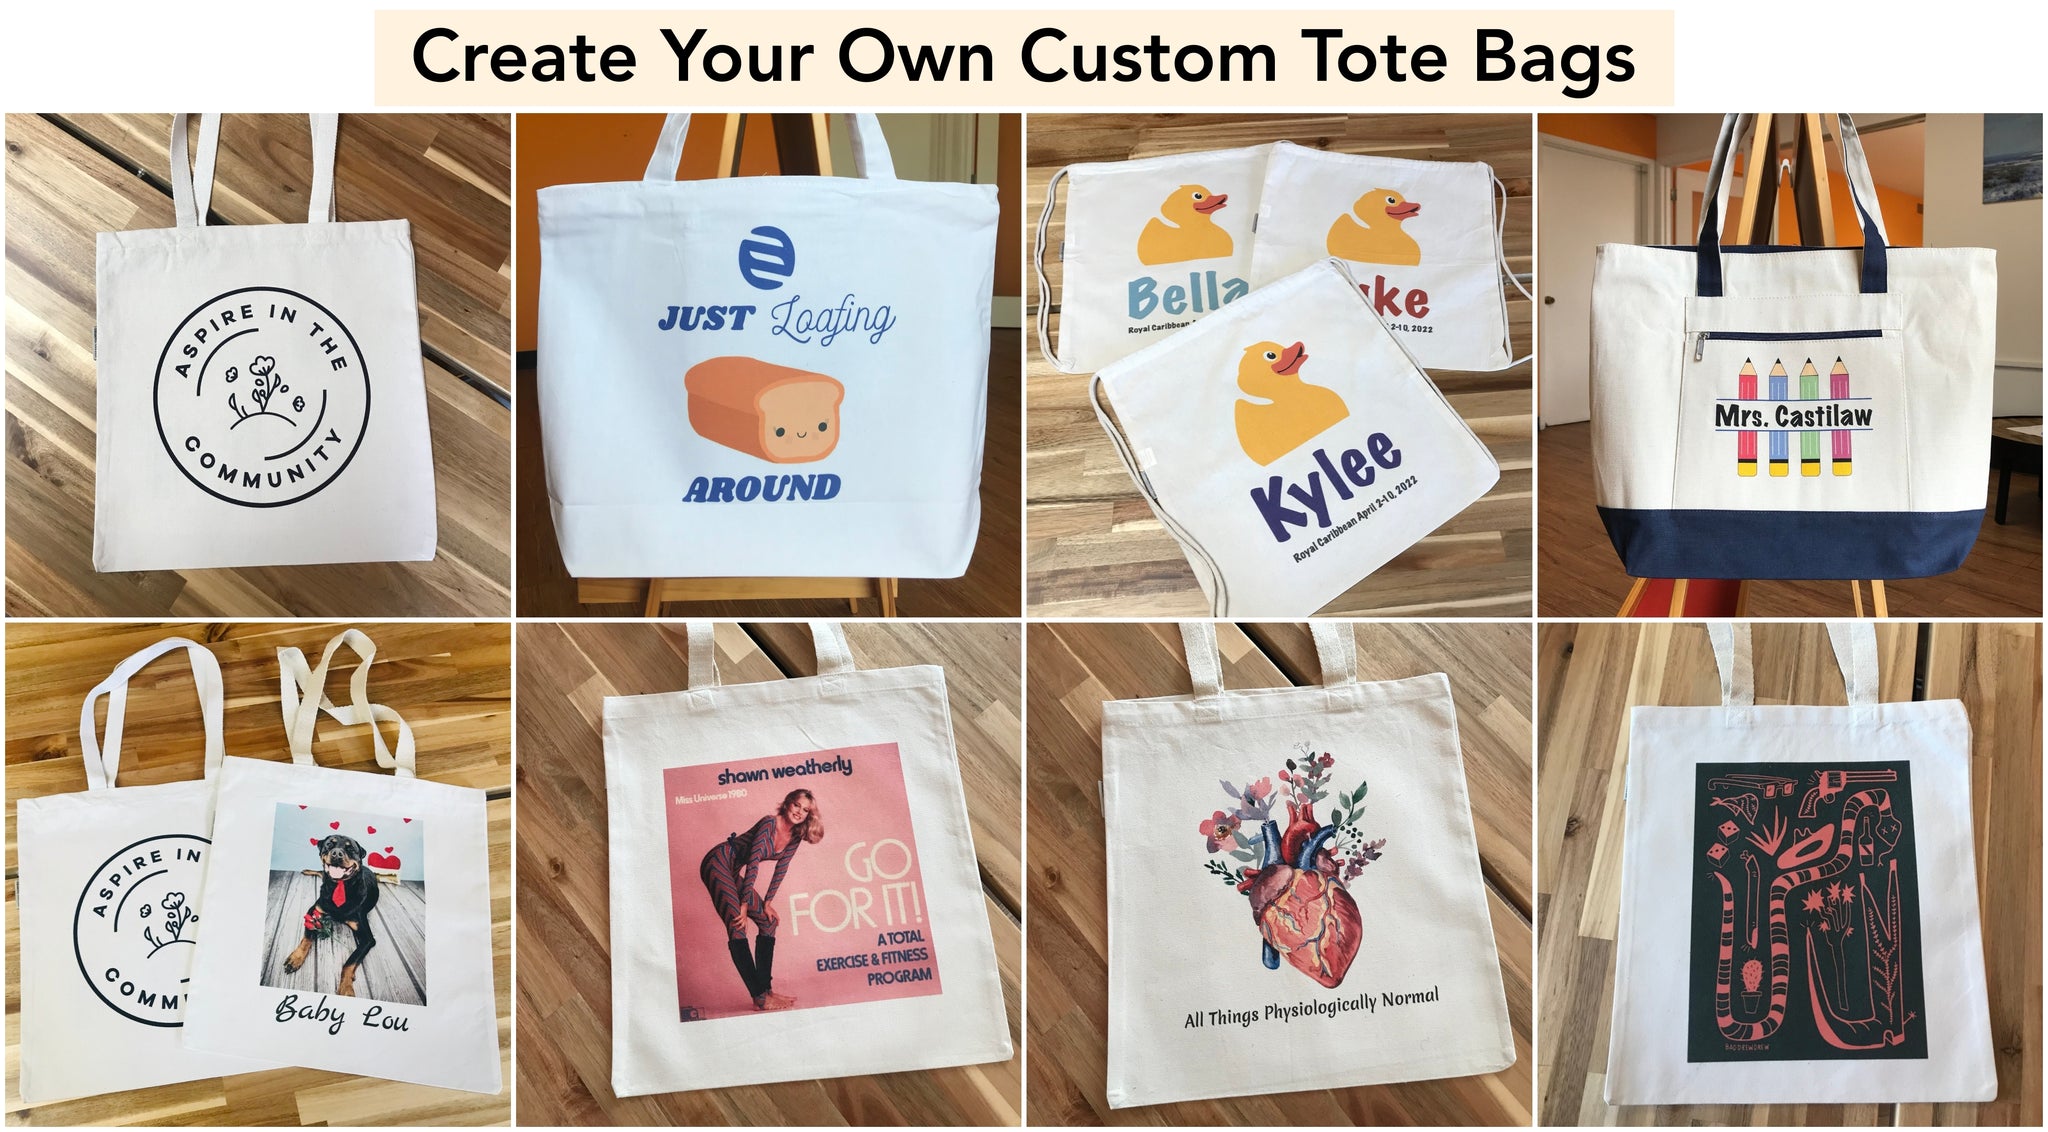 Custom Personalized Canvas Tote Bags, Screen Printed Bags, Digital Printed Cotton Totes Wholesale Cotton Bags in Bulk No Minimum Quantity